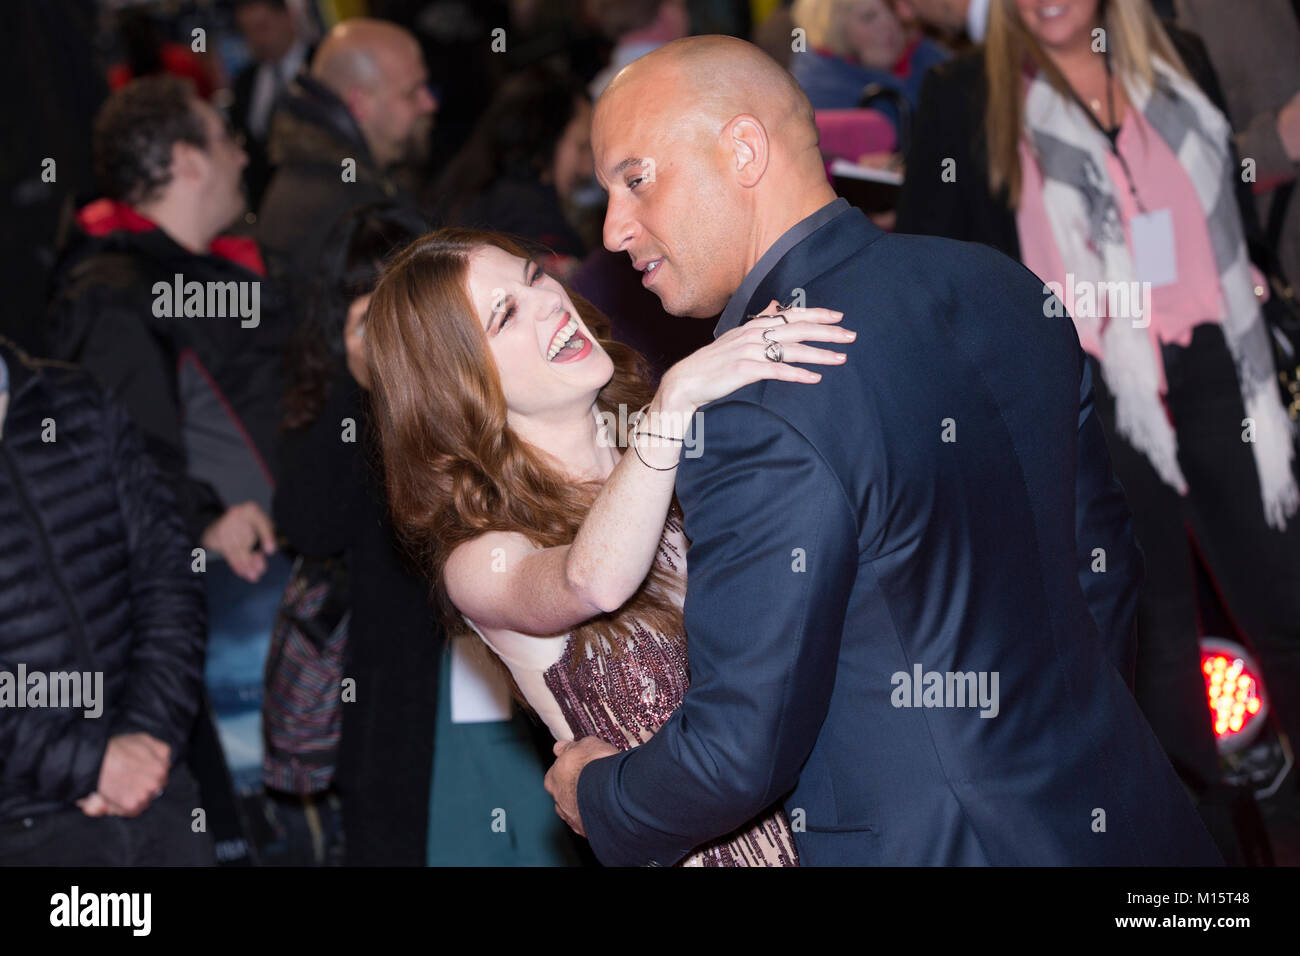 London, UK, 19 October 2015,Vin Diesel, Rose Leslie, film premiere of 'The Last Witch Hunter' at the Empire Leicester Square. Mariusz Goslicki/Alamy Stock Photo